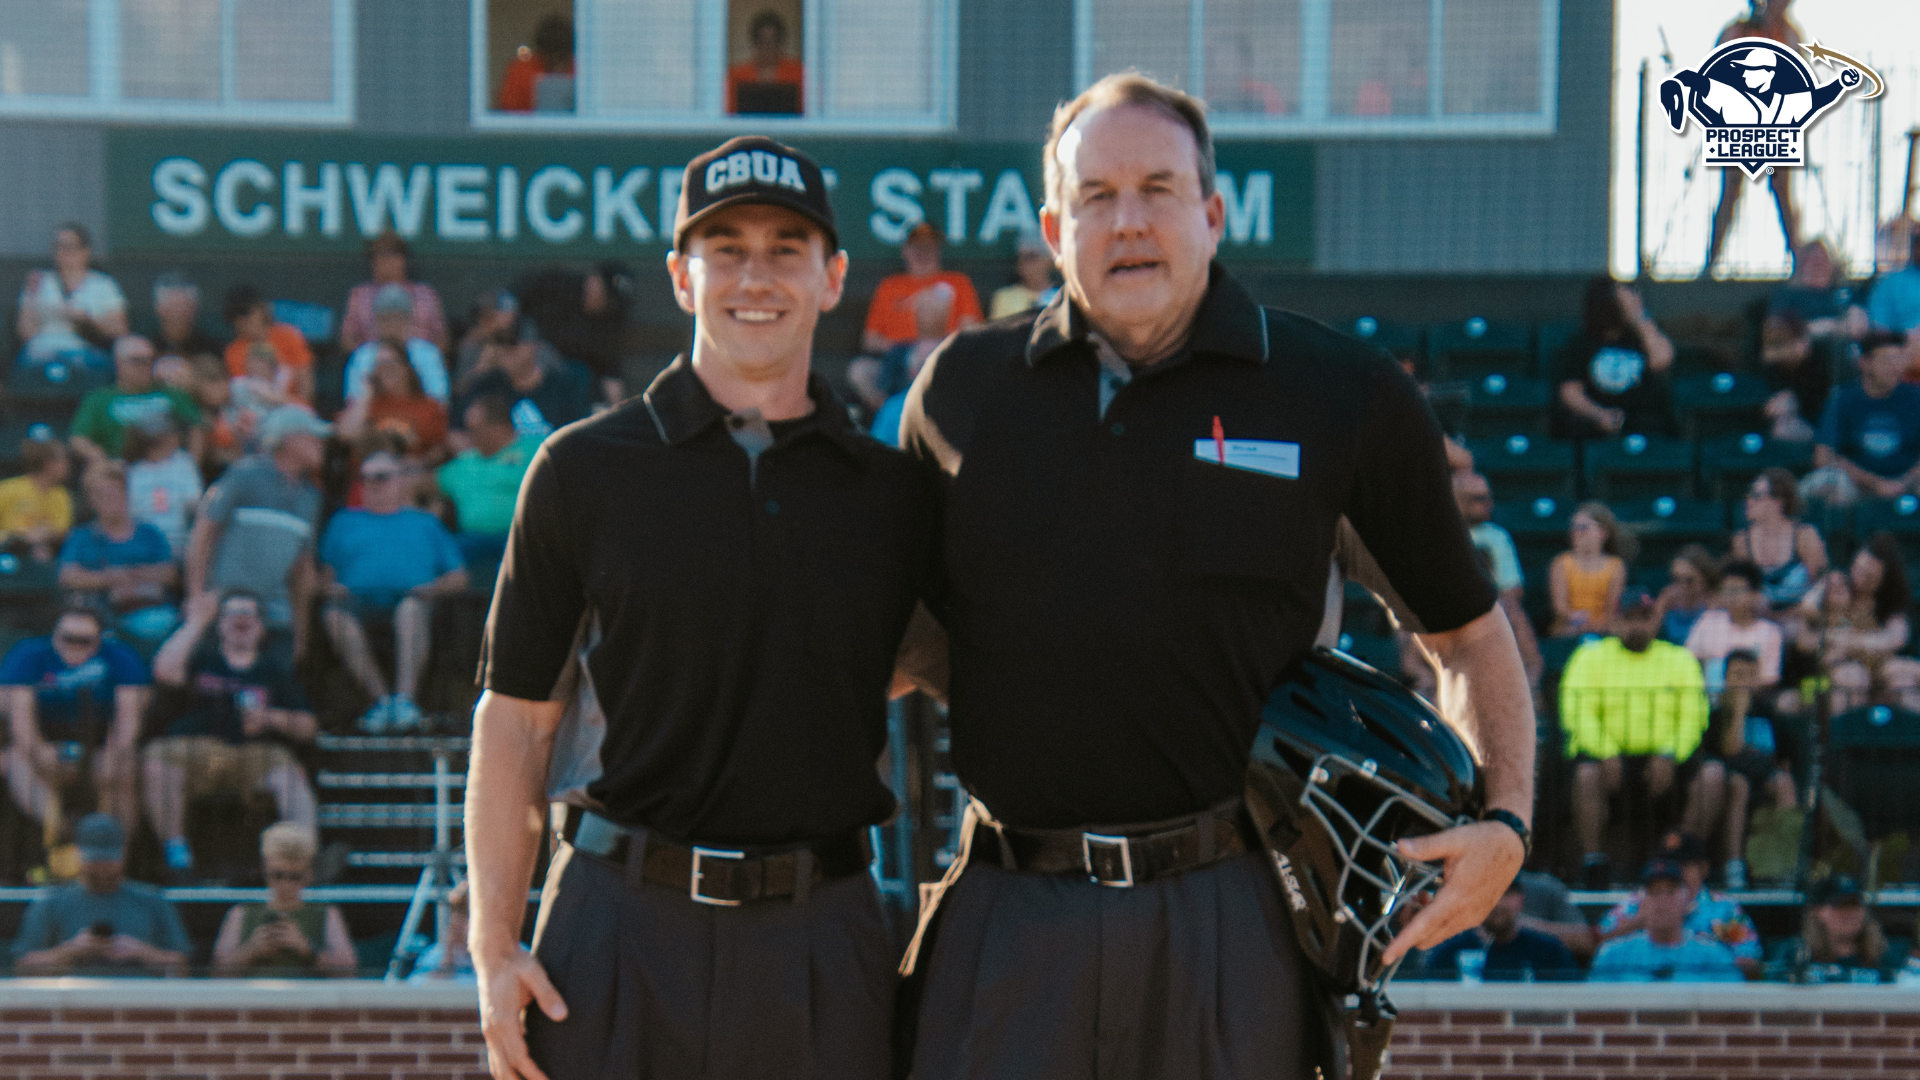 Check Down to First: Two Special Umpire Duos in the Prospect League